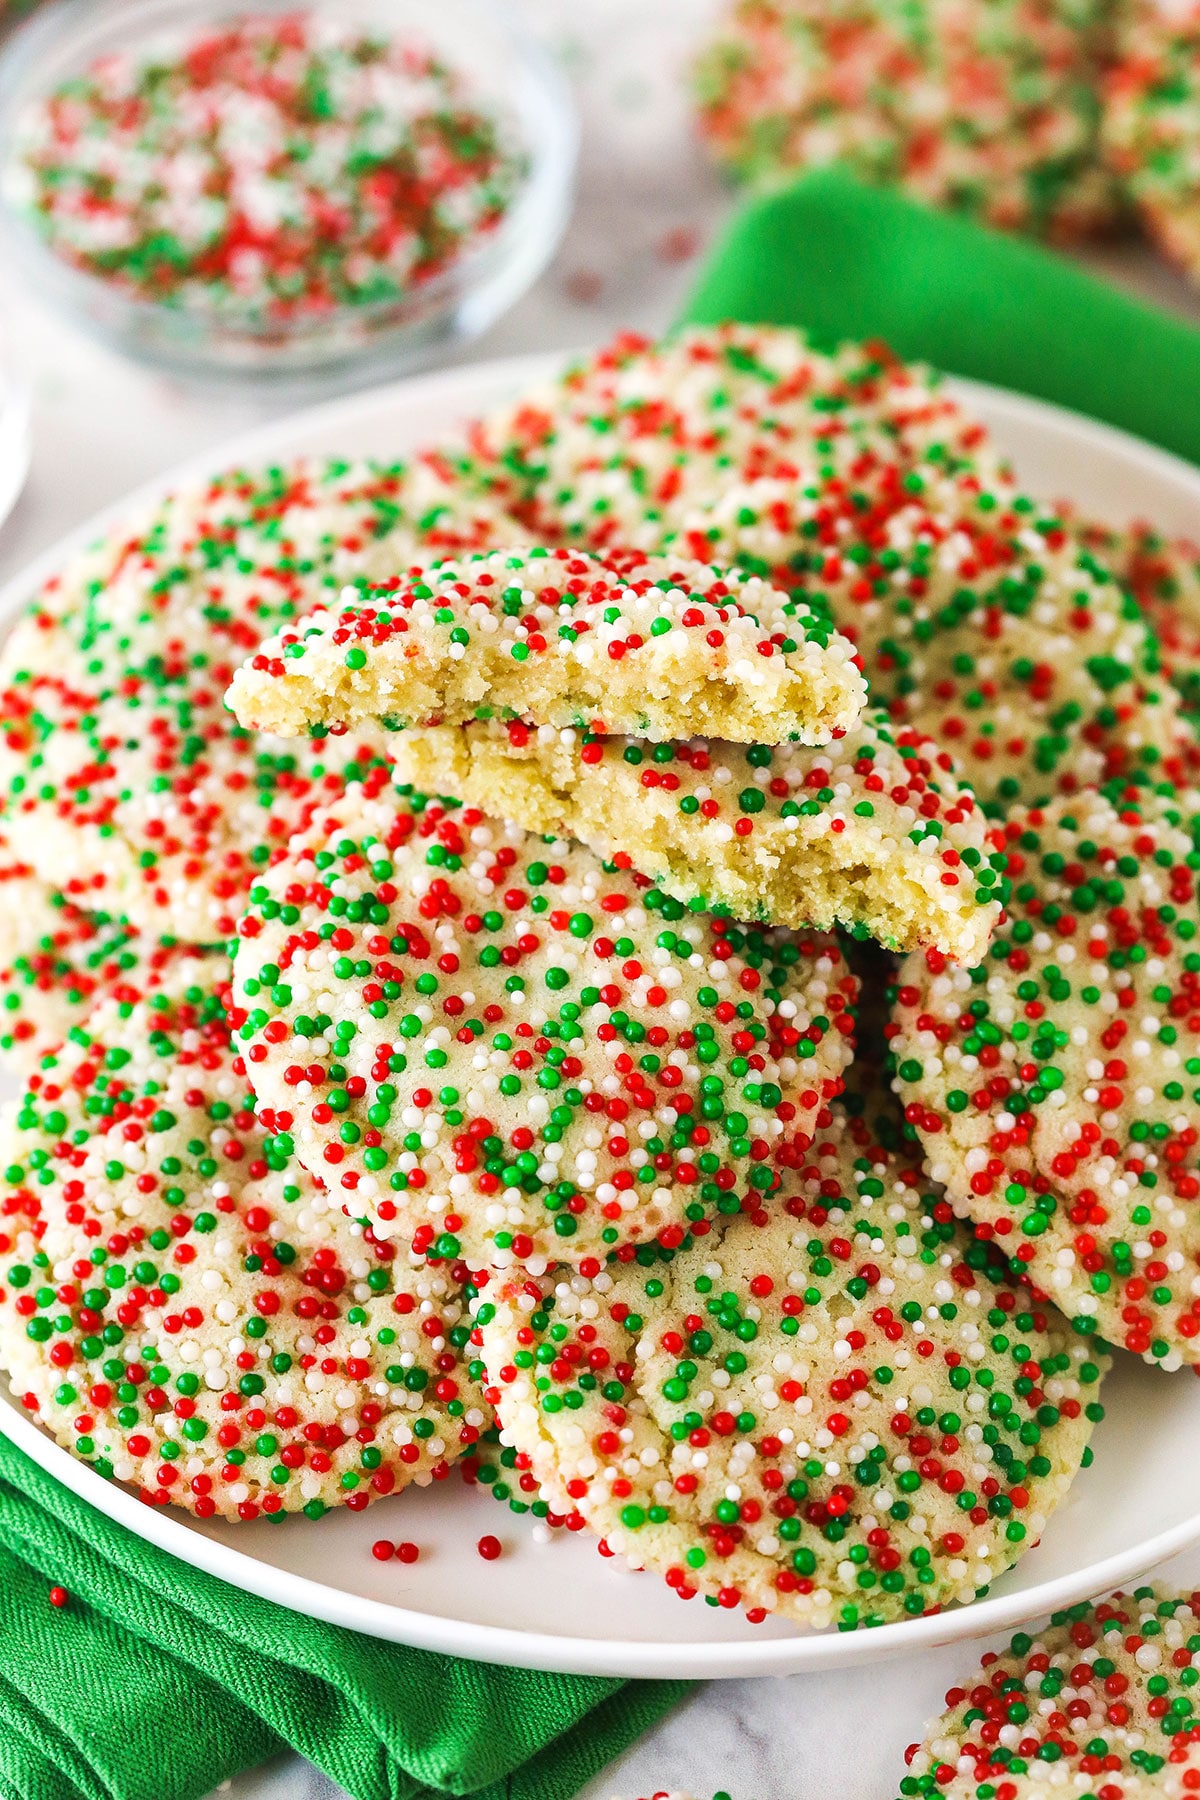 Christmas Party Supplies - Sprinkles, Christmas Baking Supplies, Ideas